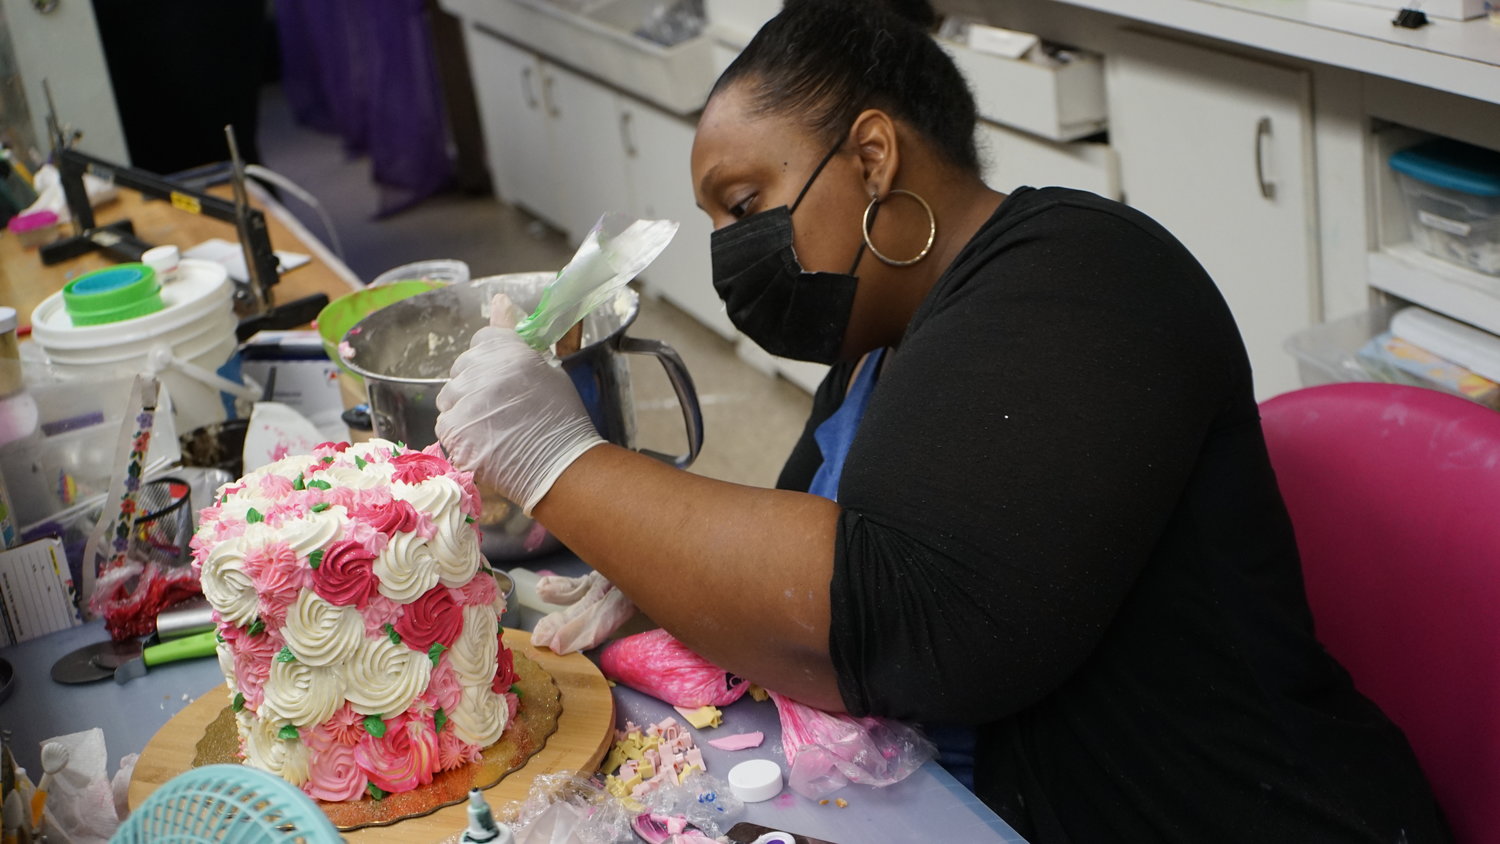 Caprice Campbell decorated a custom-ordered rosette cake at The Best Goodie Bag. Two of the shop’s owners are set to appear on the Netflix series “Sugar Rush” on Nov. 27.